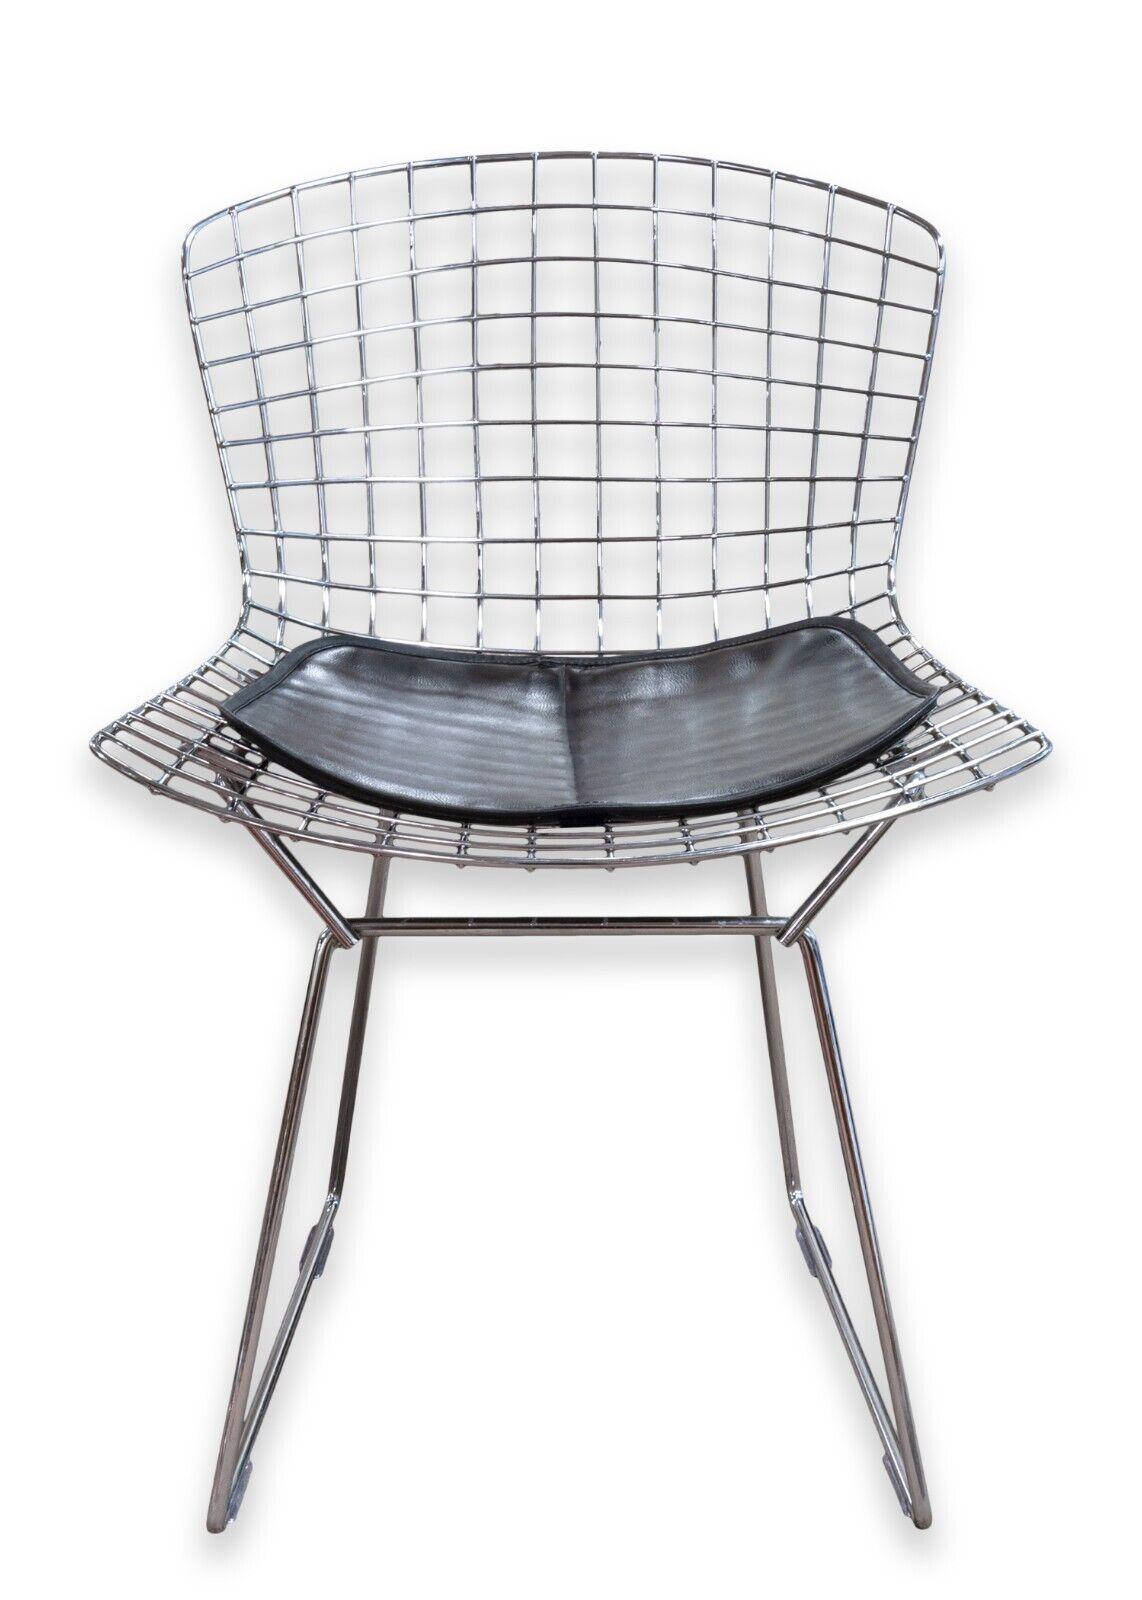 A set of 4 Harry Bertoia for Knoll side chairs. An iconic chair featuring chrome rods and a black leather seat pad. This set of chairs is in very good condition. They measure 29.25 in tall, 21.25 in wide, and 24 in deep. They have a seat height of